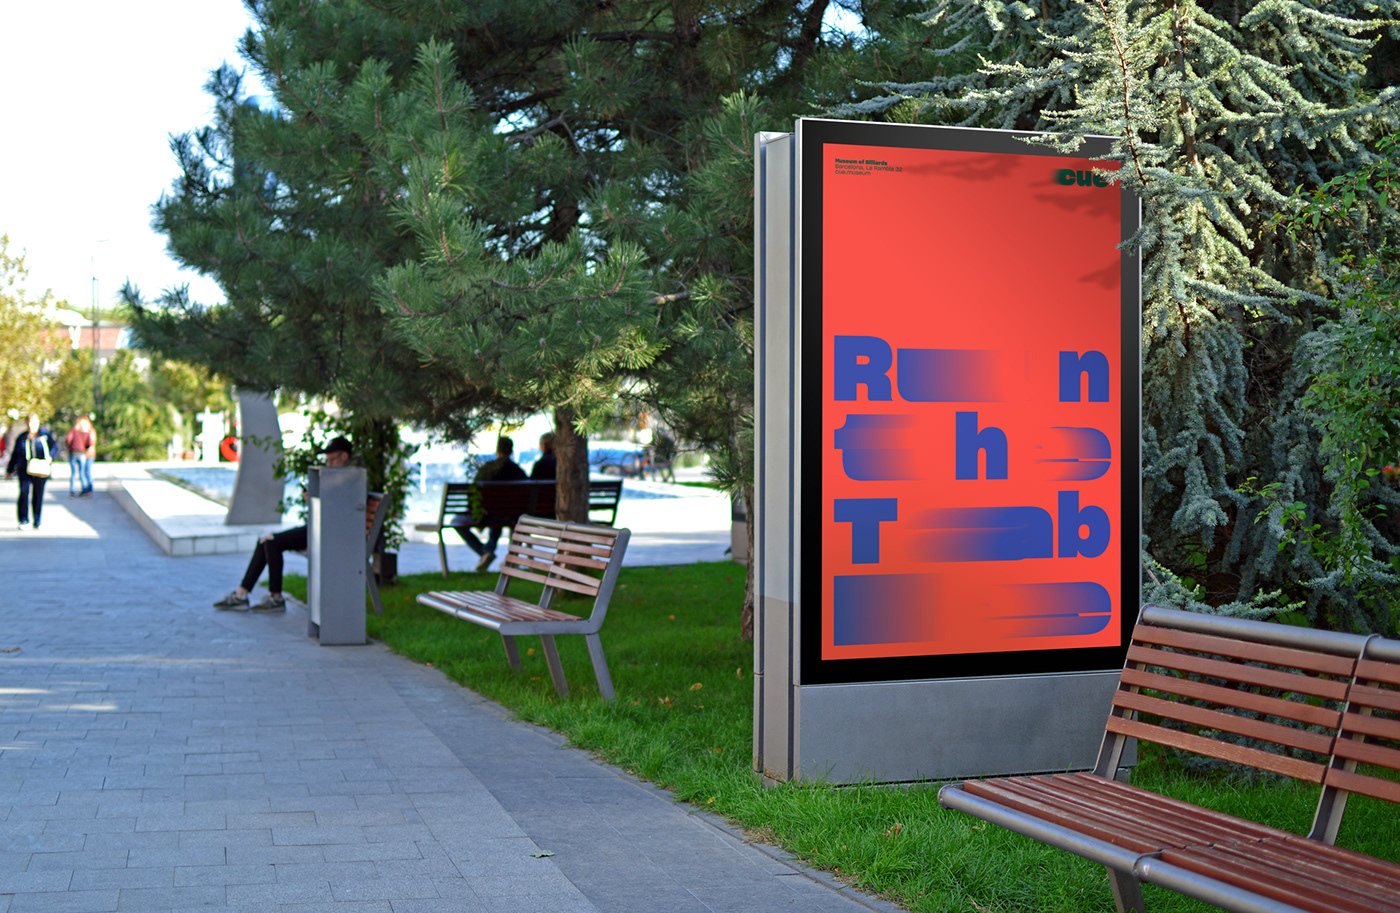 "run table" Blue over red dynamic typographic poster design placed on a street billboard mockup